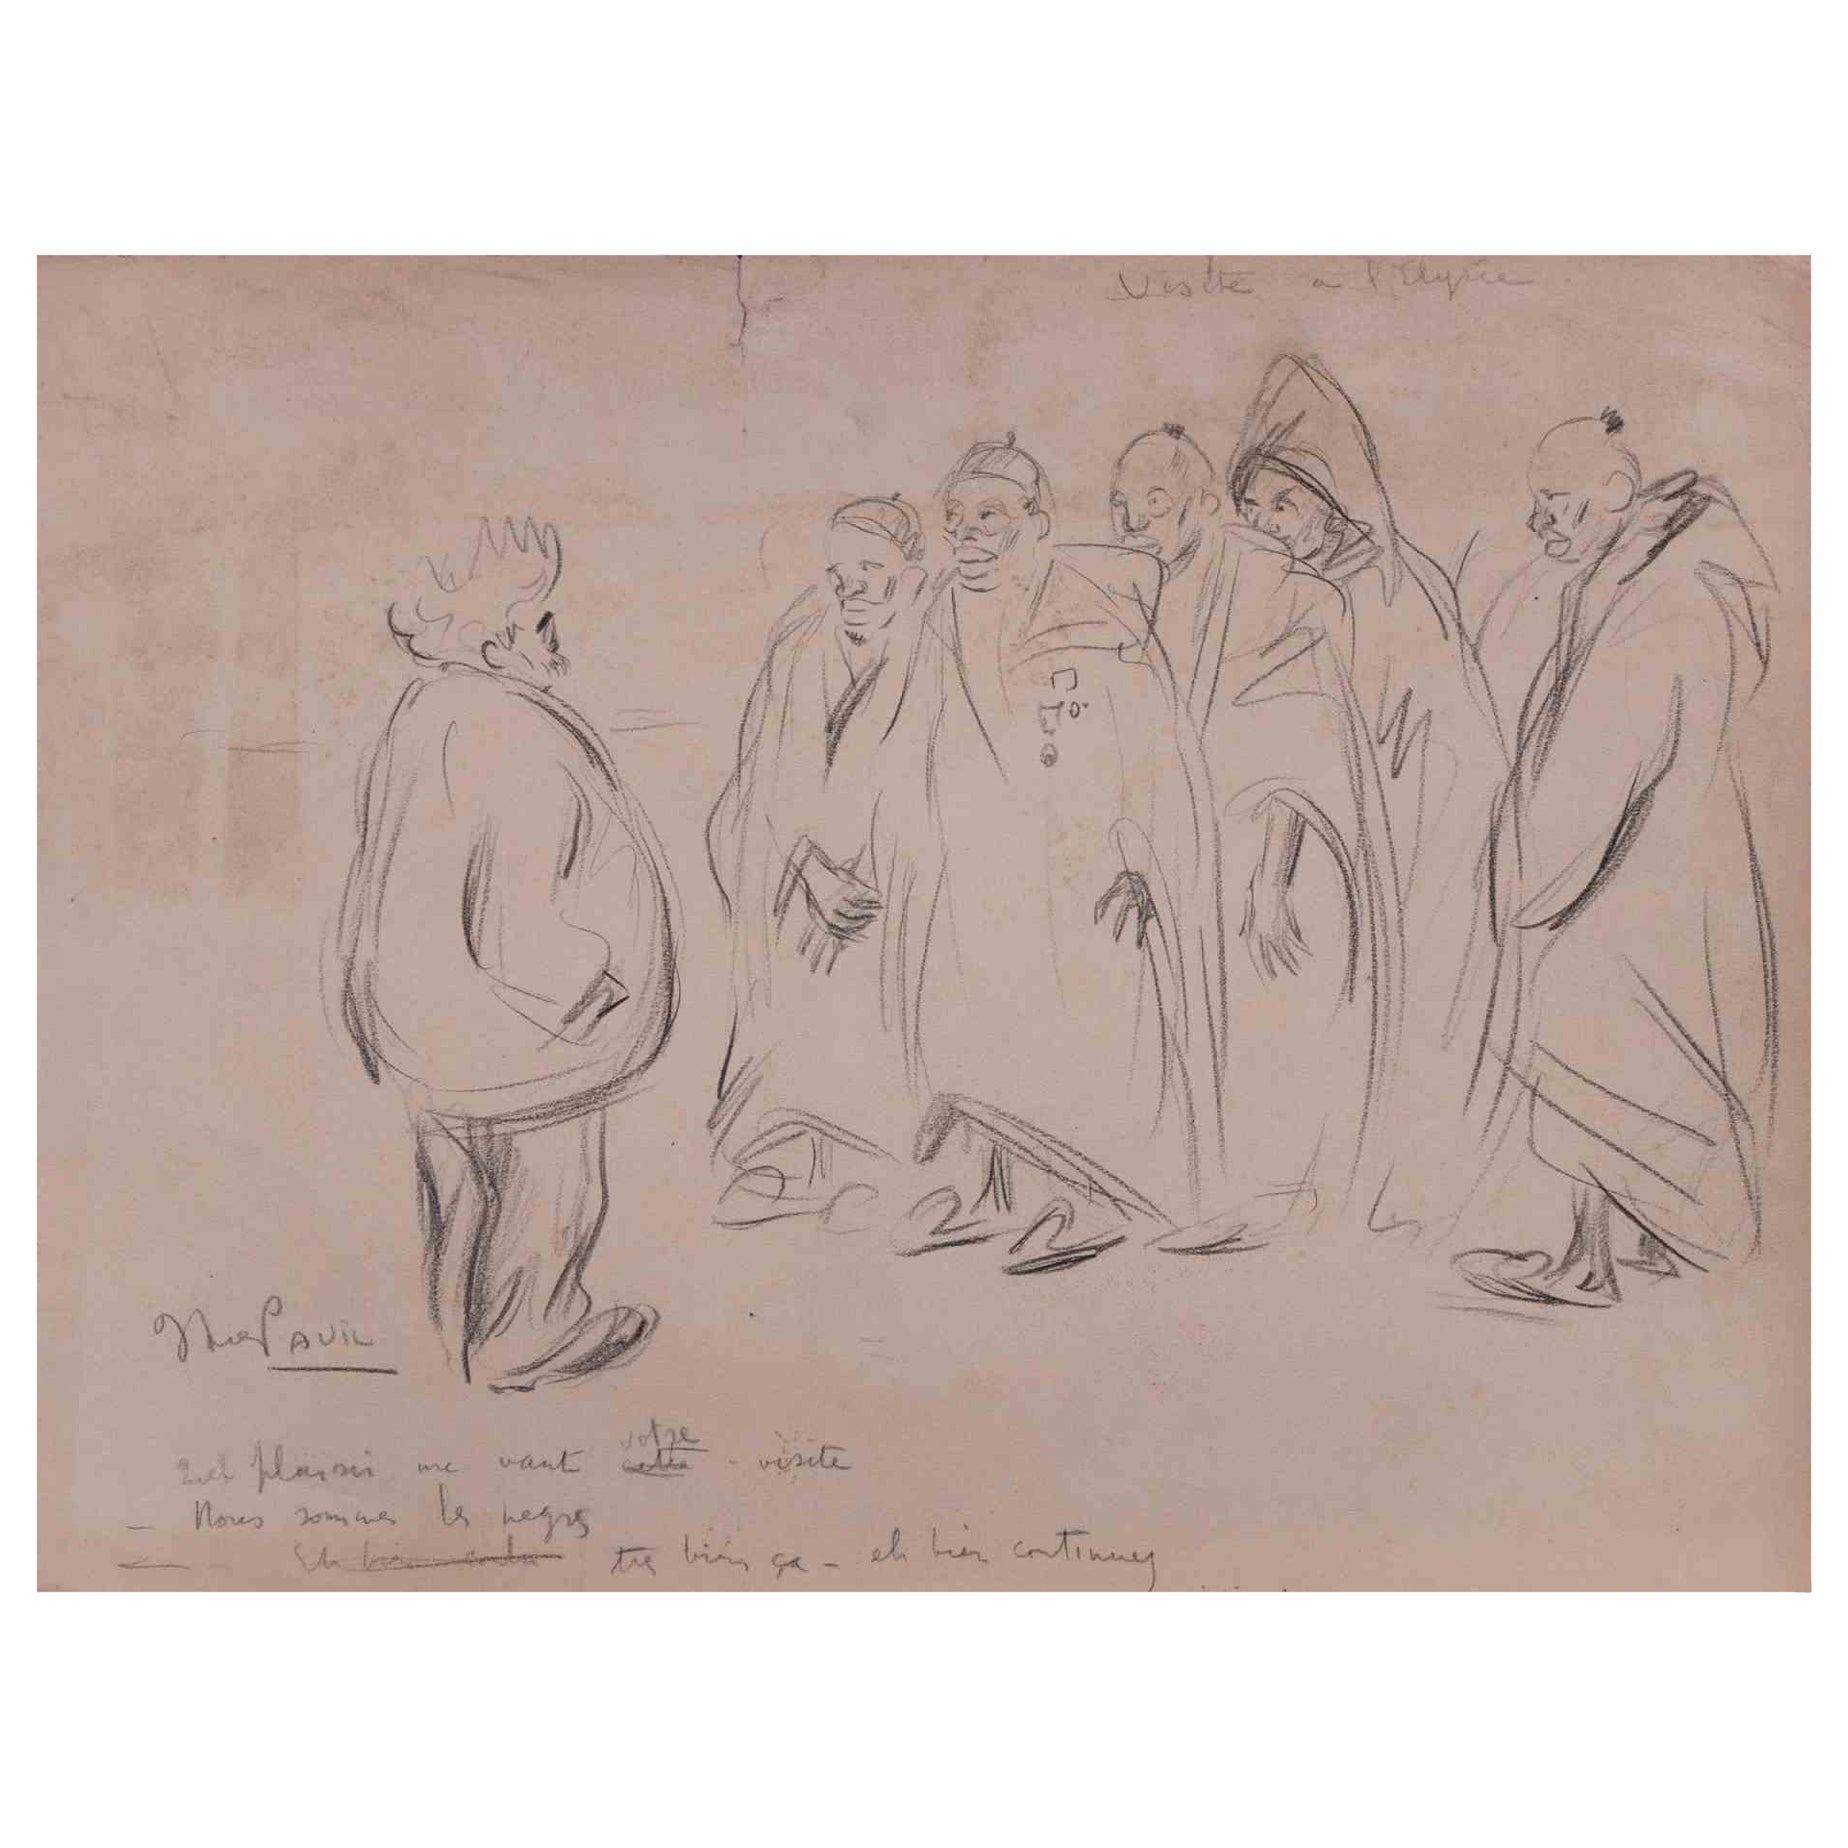 Visite a l'Elysée is an original artwork realized by Elie Anatole Pavil (1873-1948).

Original drawing on paper, realized on early-20th century, hand signed in pencil by the artist on the lower left corner. Insertion of a short dialogue on the lower